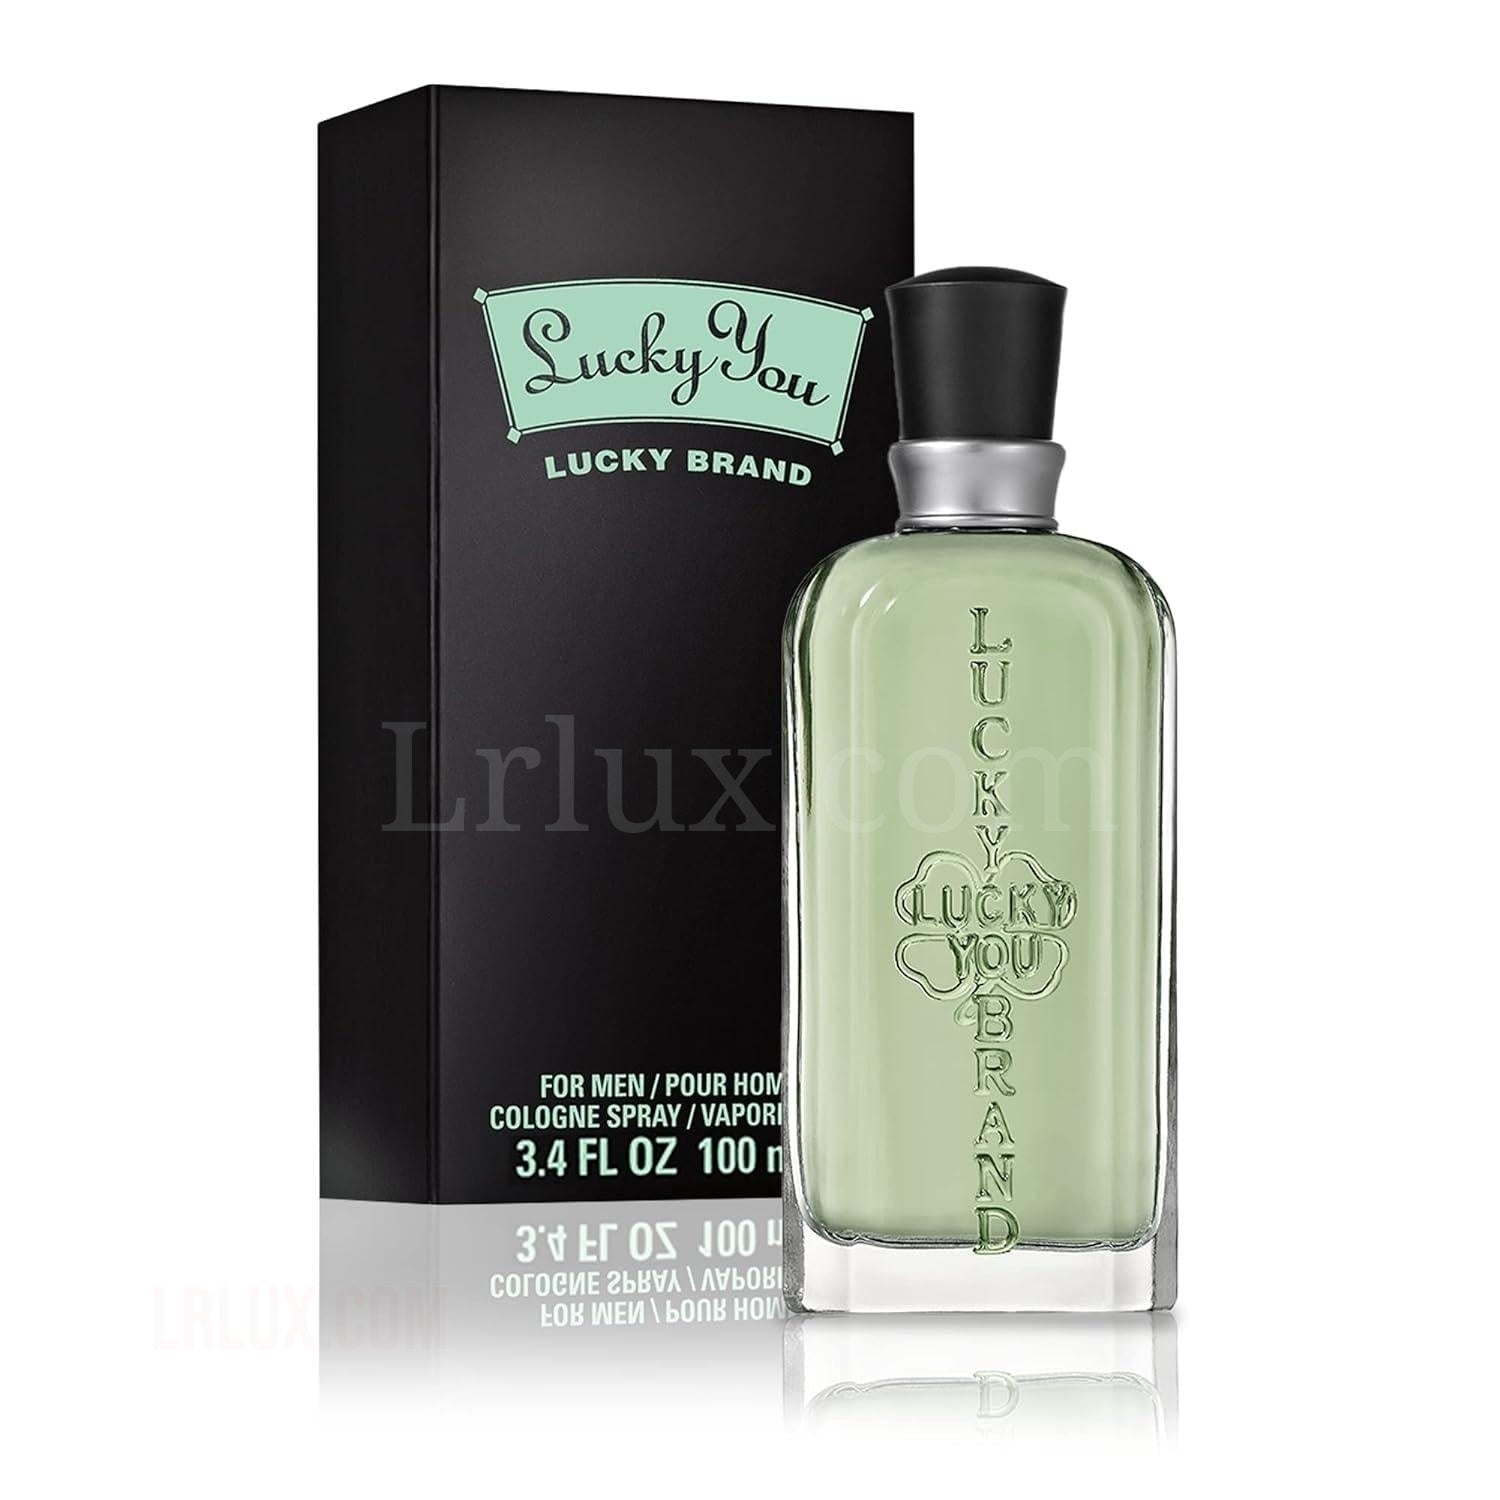 Lucky You Men's Cologne Fragrance Spray, Day or Night Casual Scent with Bamboo Stem Fragrance Notes, 3.4 Fl Oz - Lrlux.com